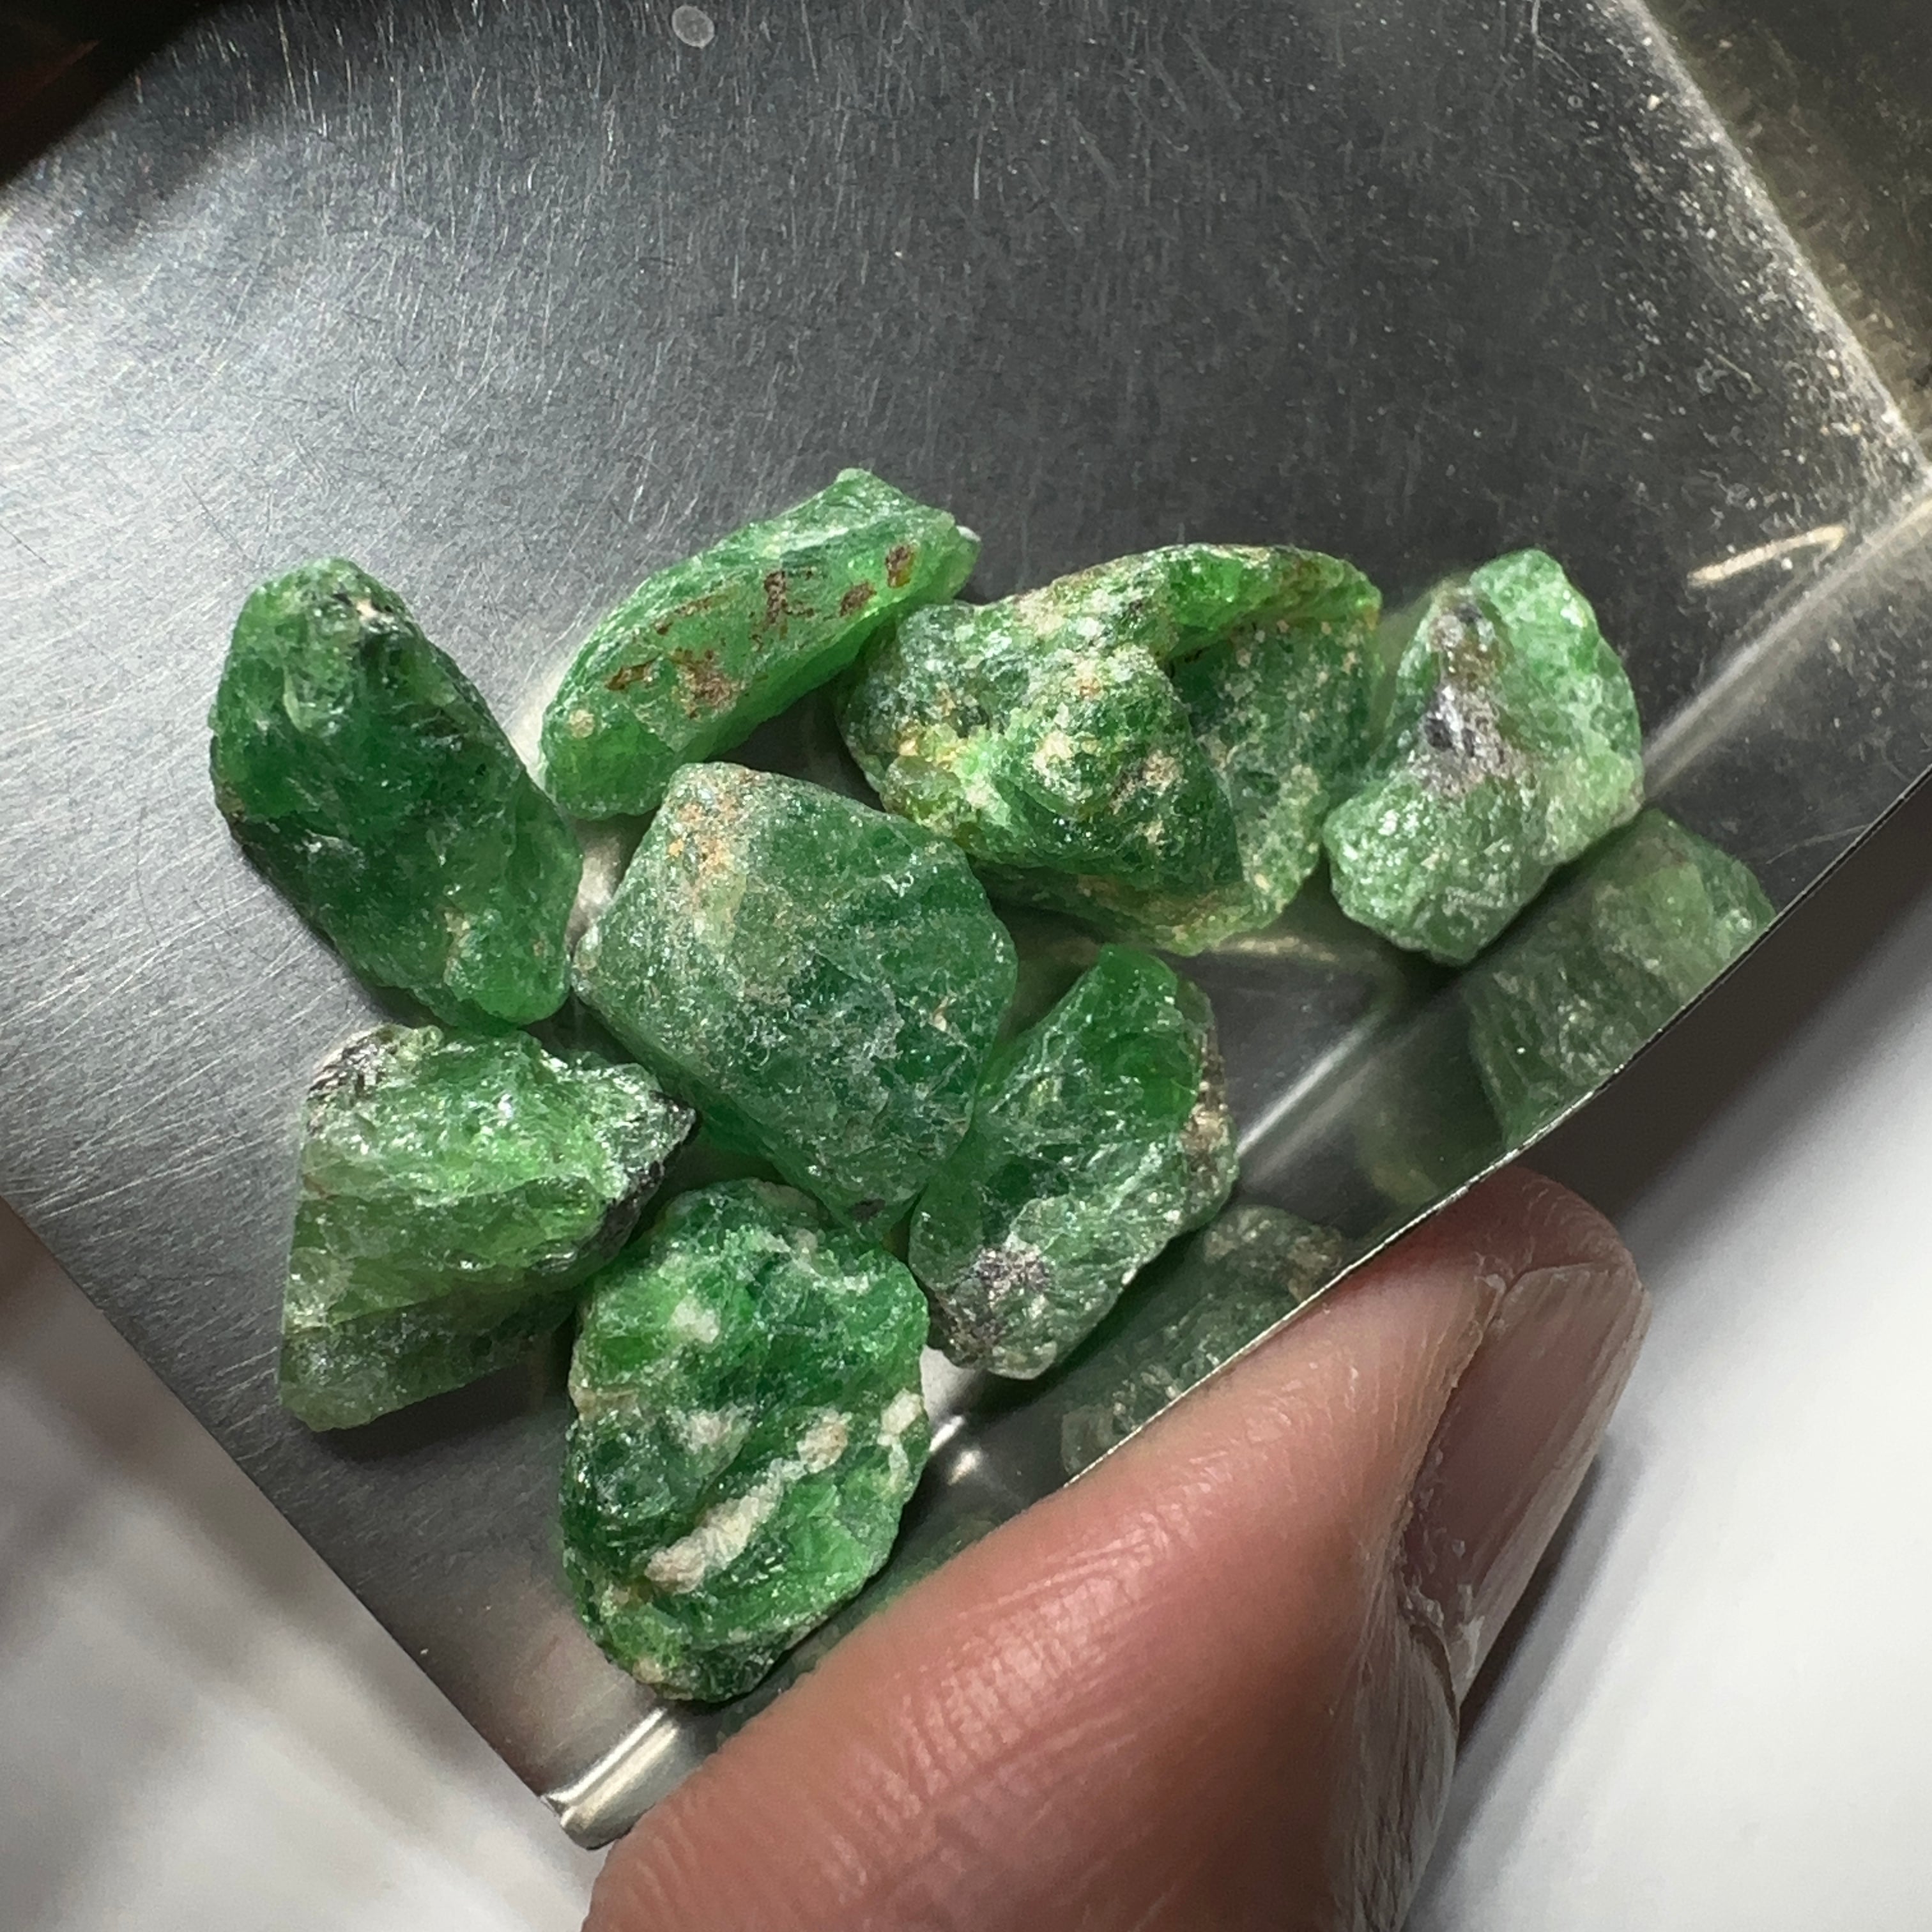 48.73ct Tsavorite Garnet Lot, Tanzania. Untreated Unheated. 3.05ct- 12.67ct. Good as specimens to add to a collection